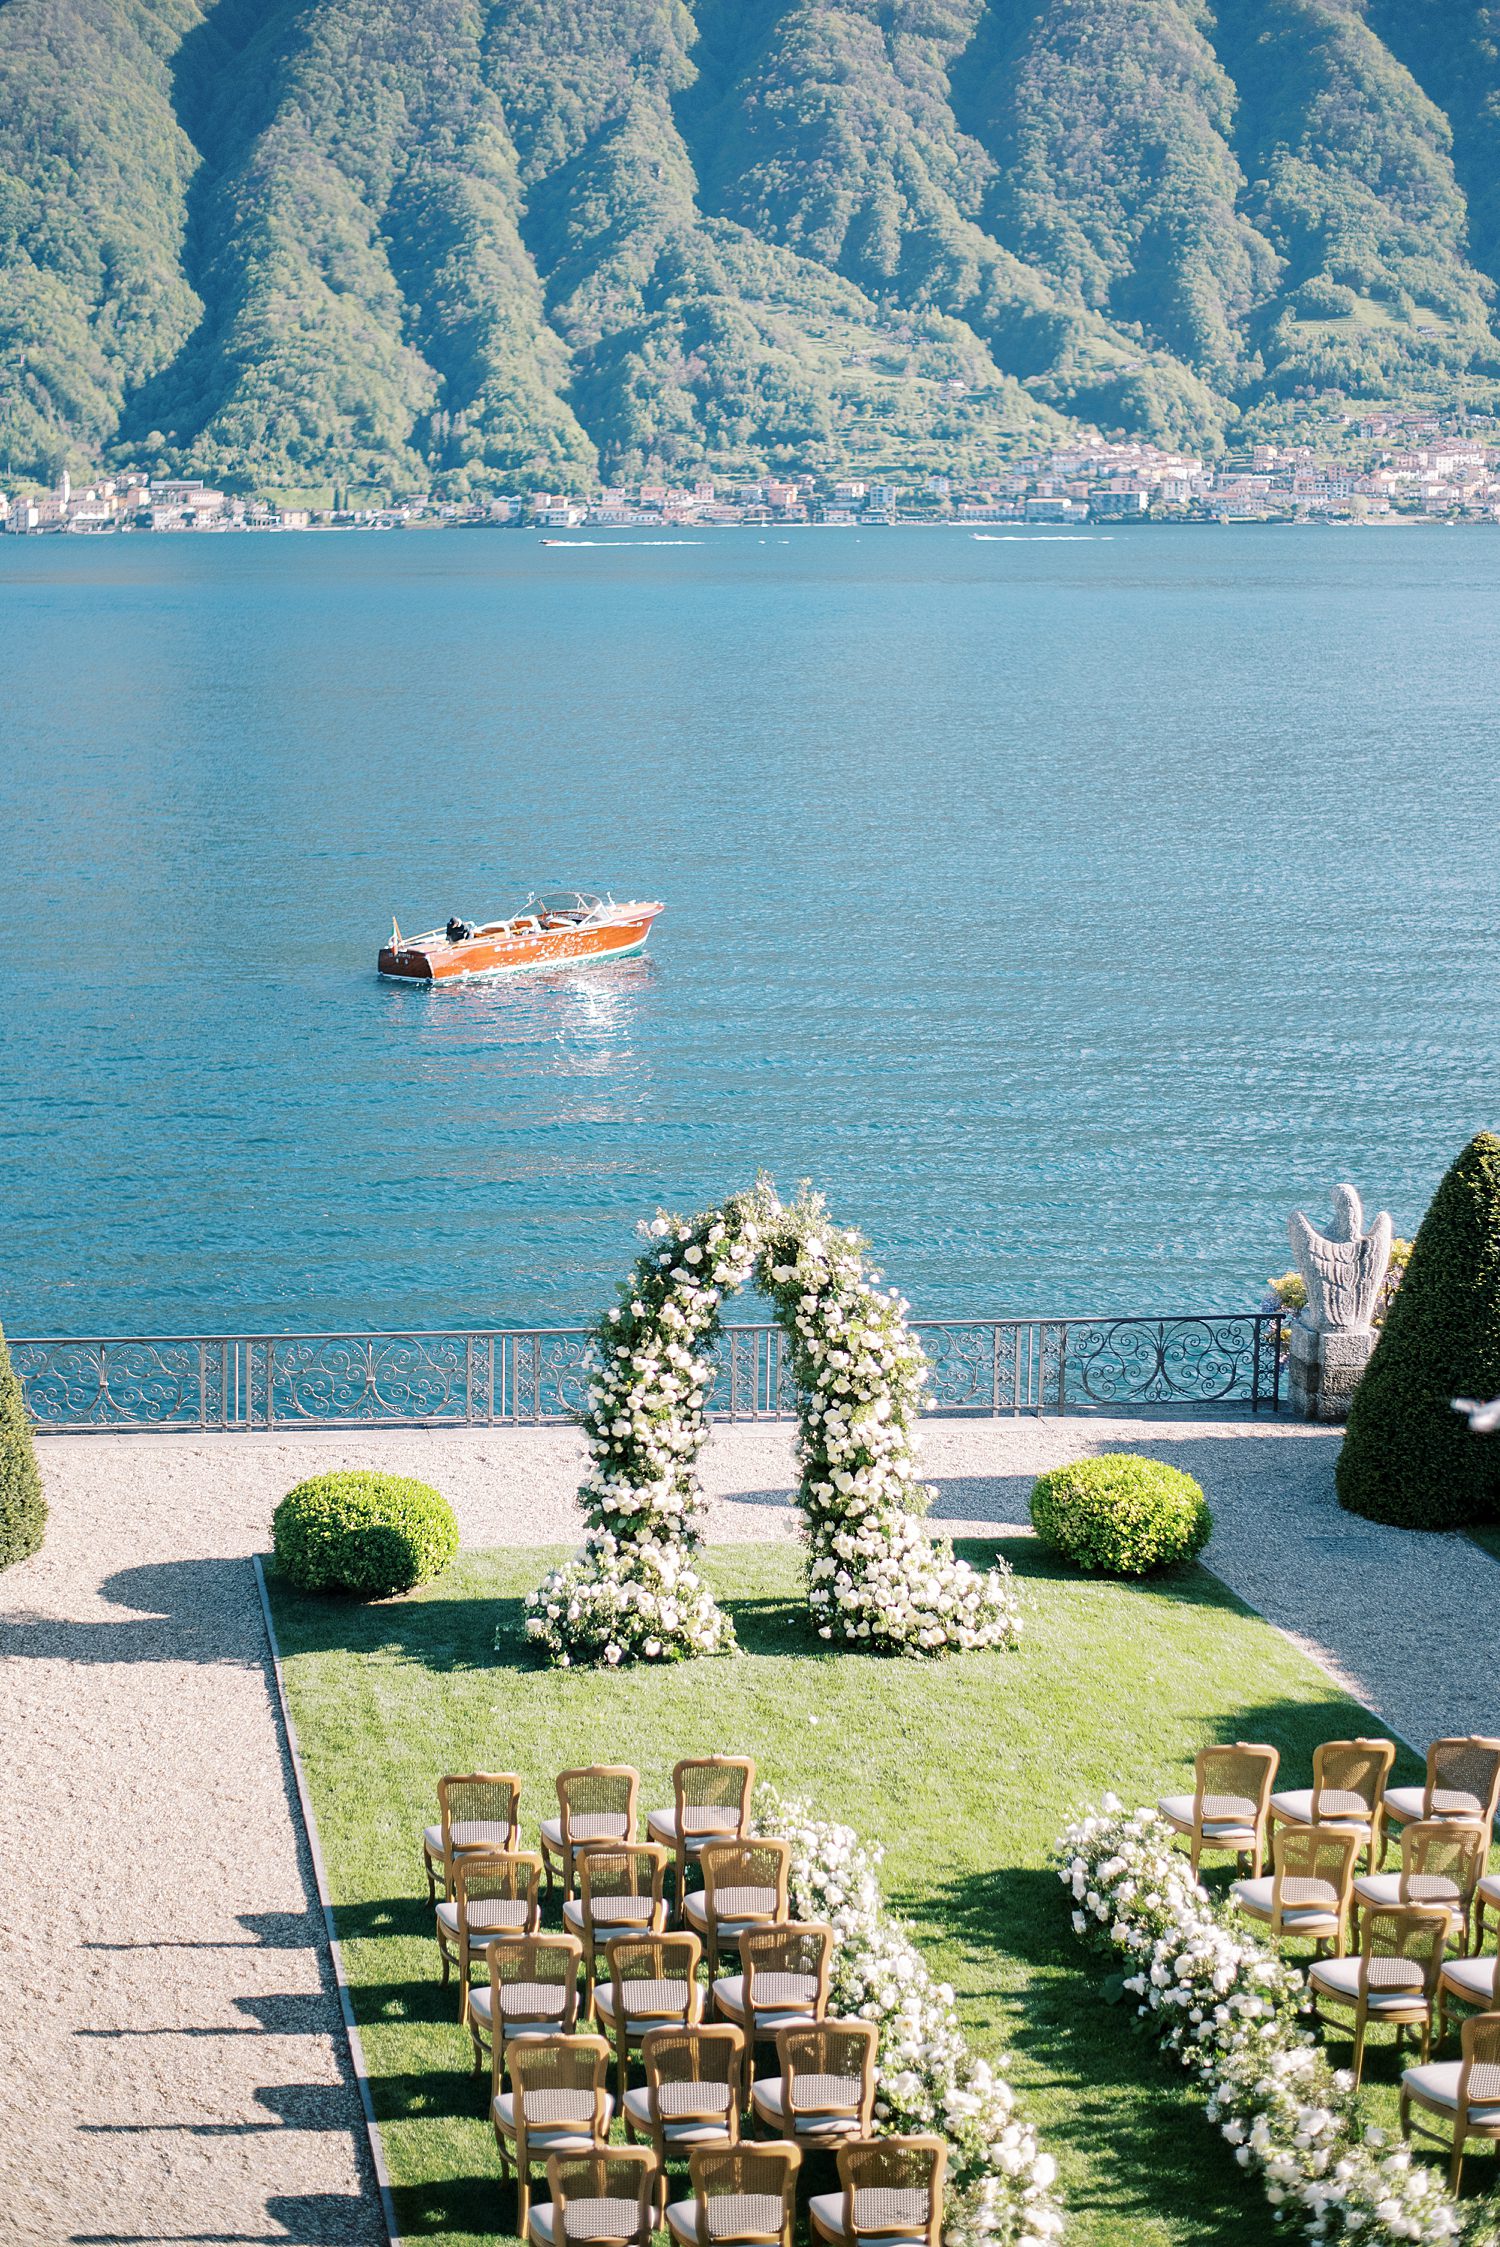 ceremony site on lawn at Villa Balbiano in front of Lake Como